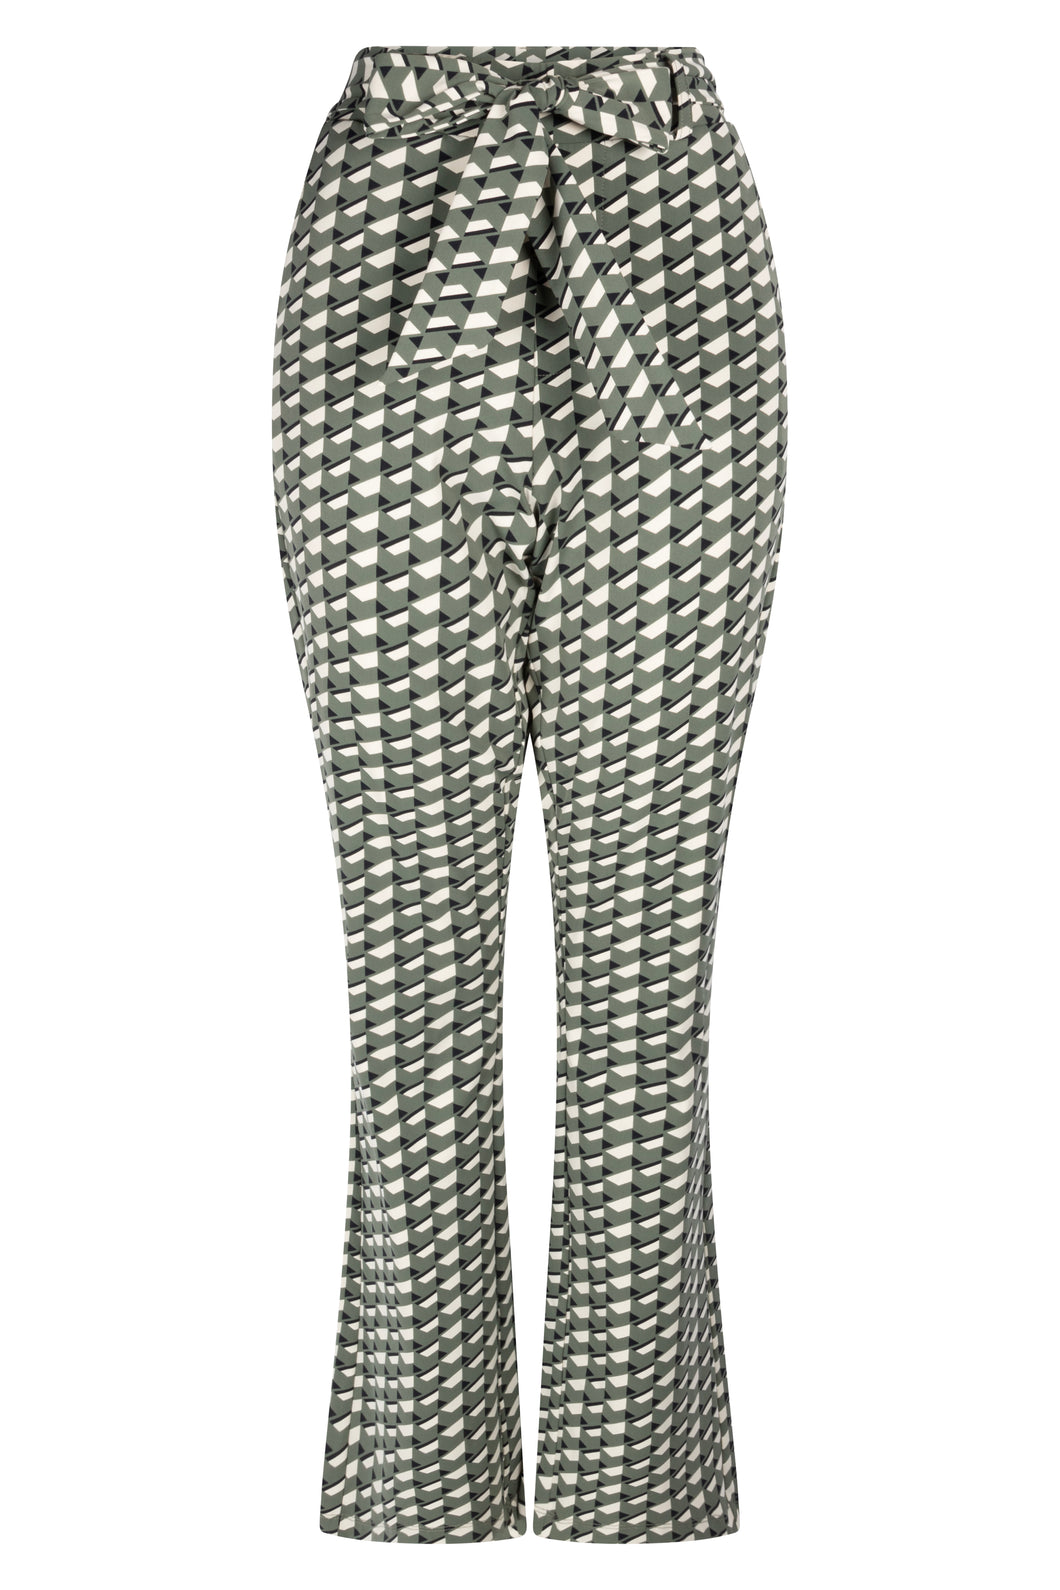 ZOSO LILLY PRINTED TRAVEL TROUSER green/ivory